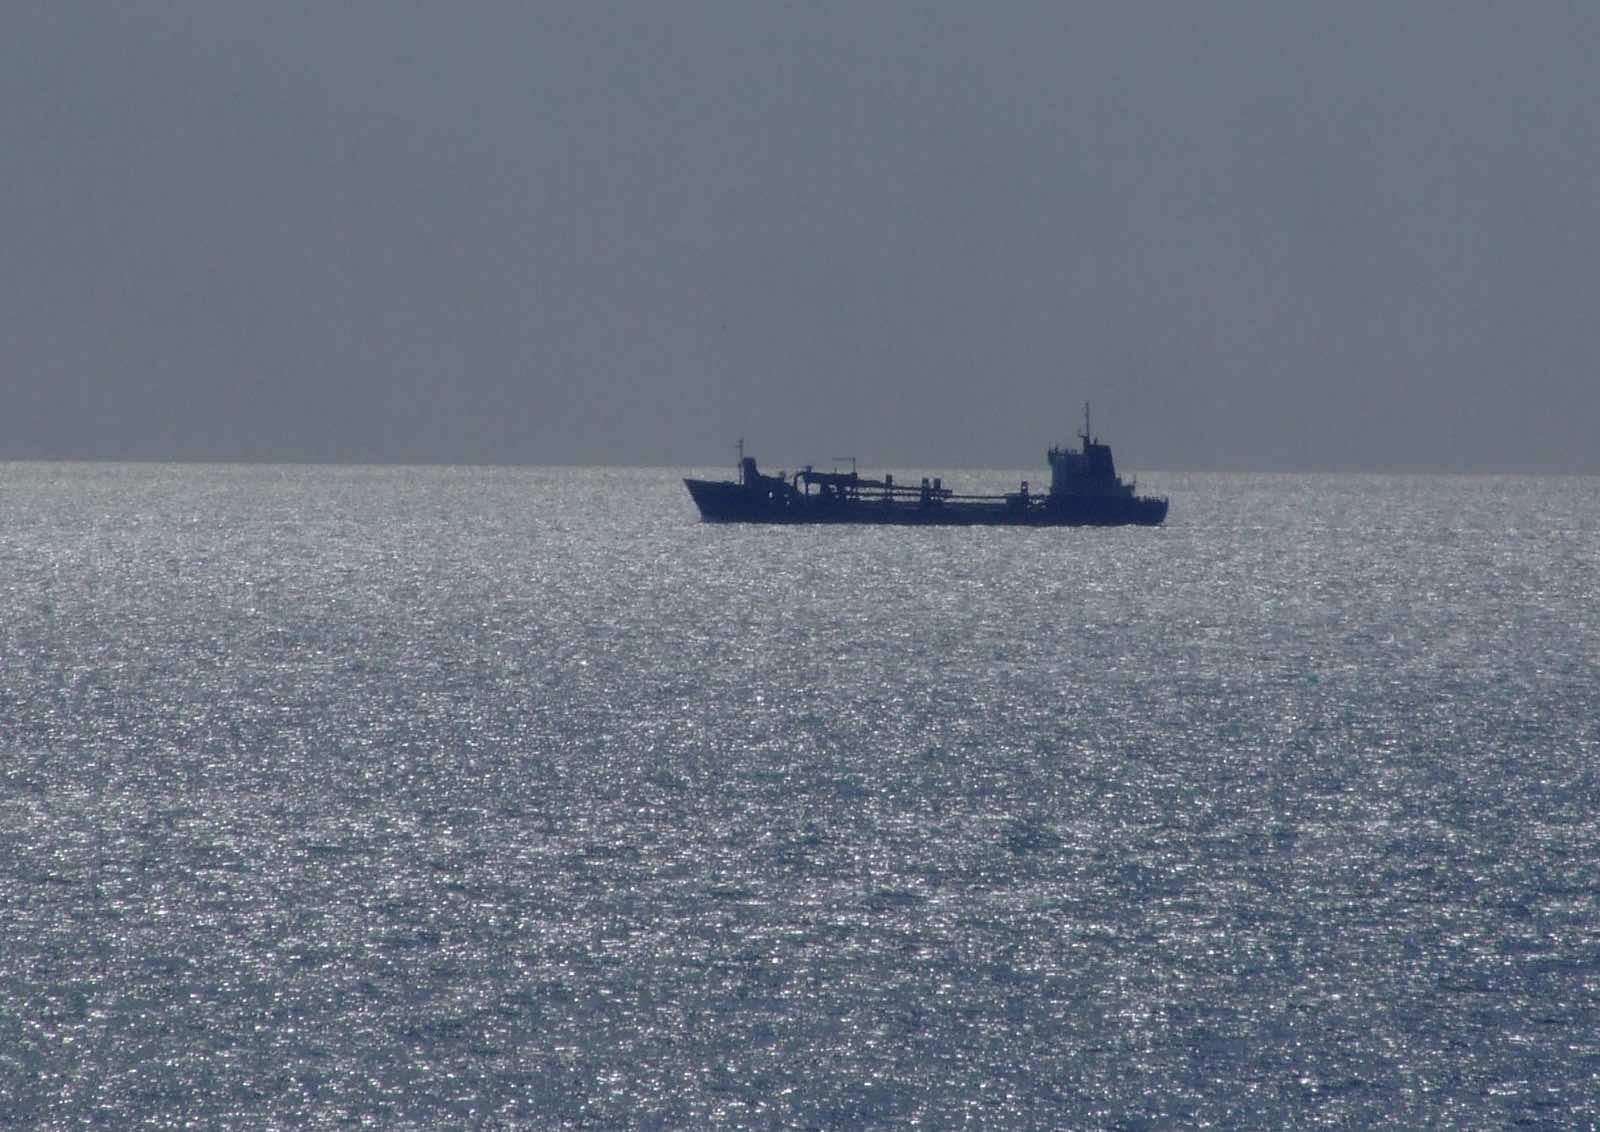 The new initiative will aim to identify so-called “black ships”, those vessels that turn-off usual tracking transponders to engage in illicit activity such as illegal fishing, smuggling or piracy (Les Chatfield/Flickr)